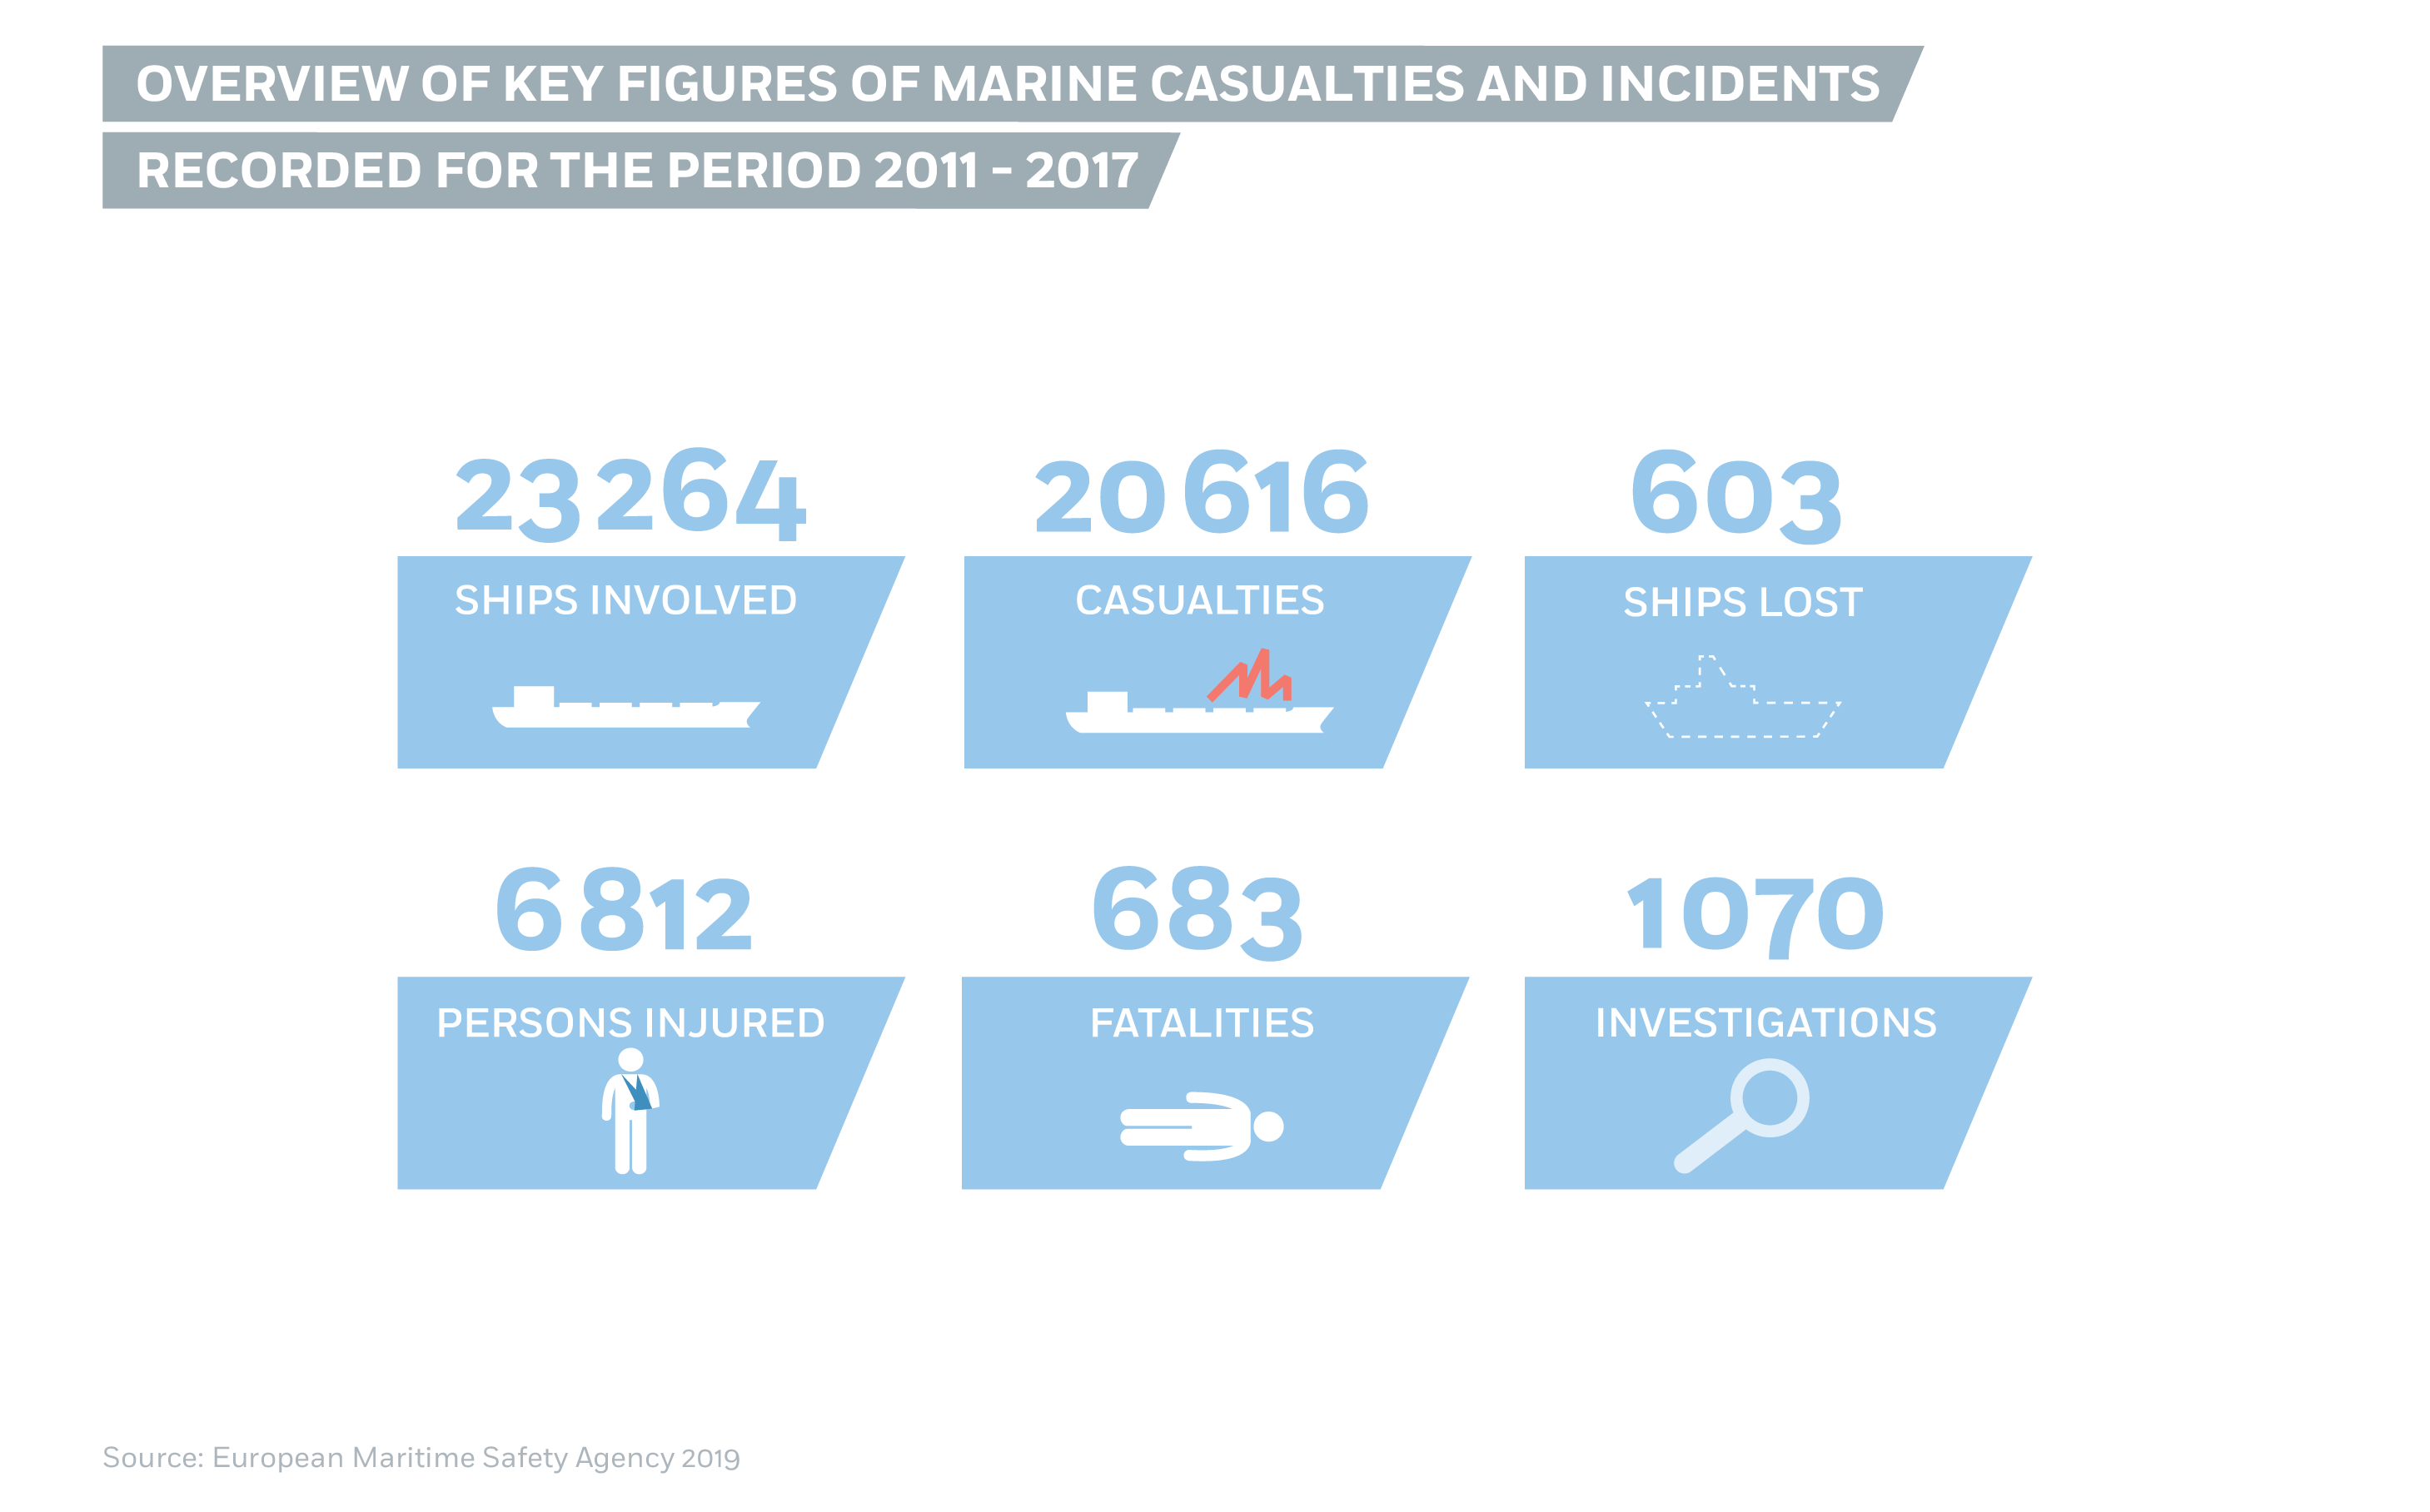 Overview of key figures of marine casualties and incidents ... Image 1